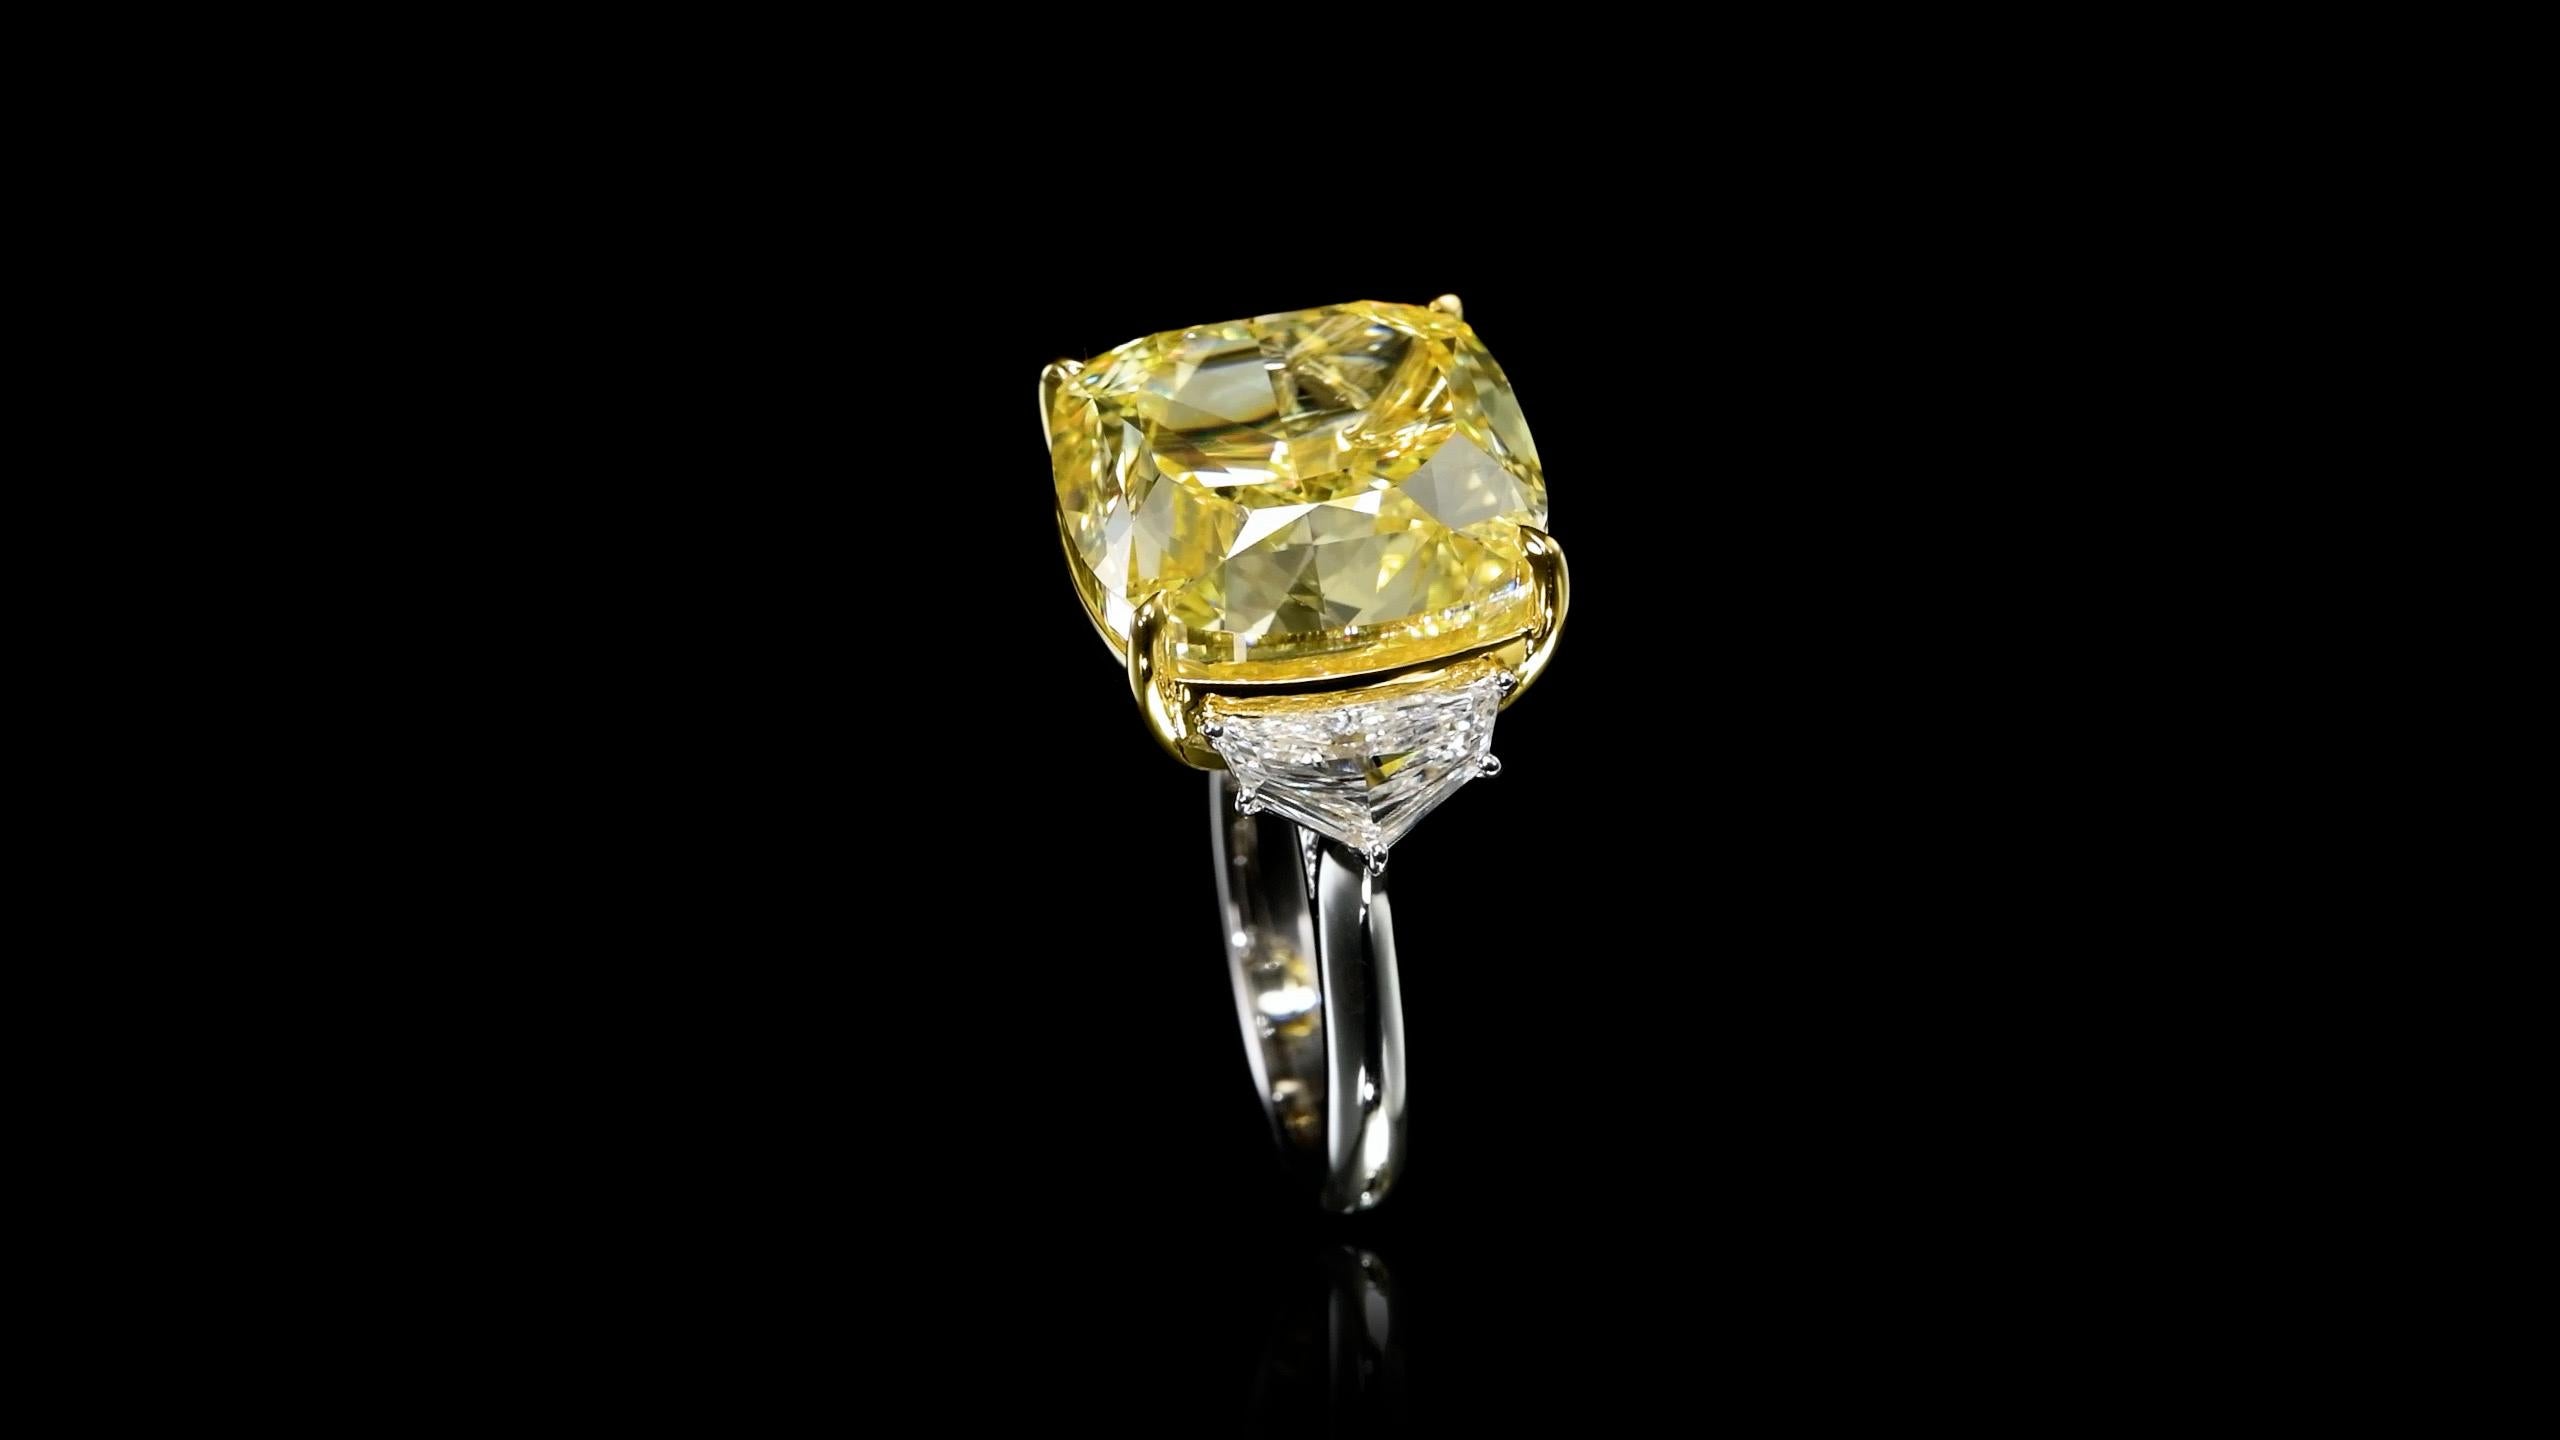 From Emilio Jewelry, a well known and respected wholesaler/dealer located on New York’s iconic Fifth Avenue, 
Featuring one of the rarest natural yellow diamonds on the market. Gia Certified Fancy Intense Yellow Diamond, Flawless clarity. 
Please